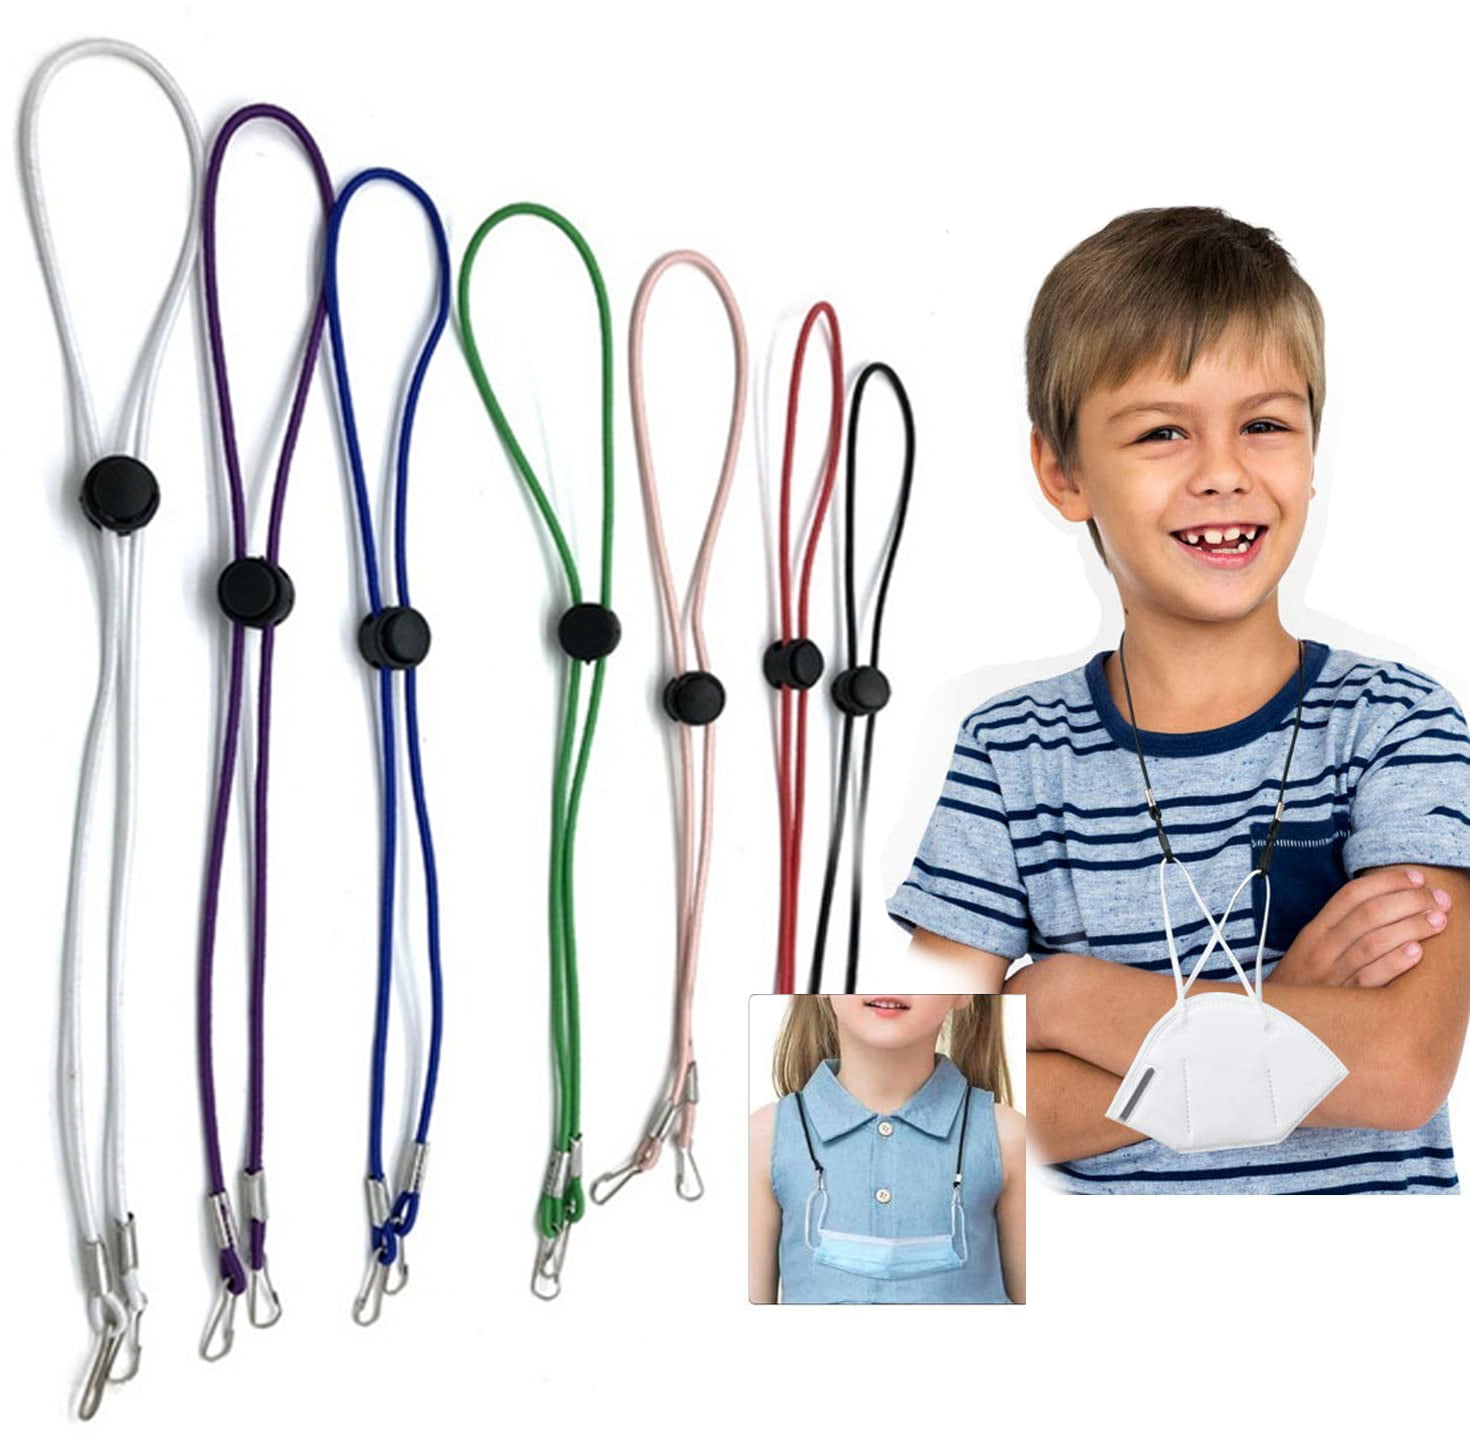 8PCS Lanyard for Kids Adjustable Lanyard Convenient Neck Lanyard Mask Strap Extenders Handy Comfortable with Safety Breakaway Clasp for School Outdoor Sport 